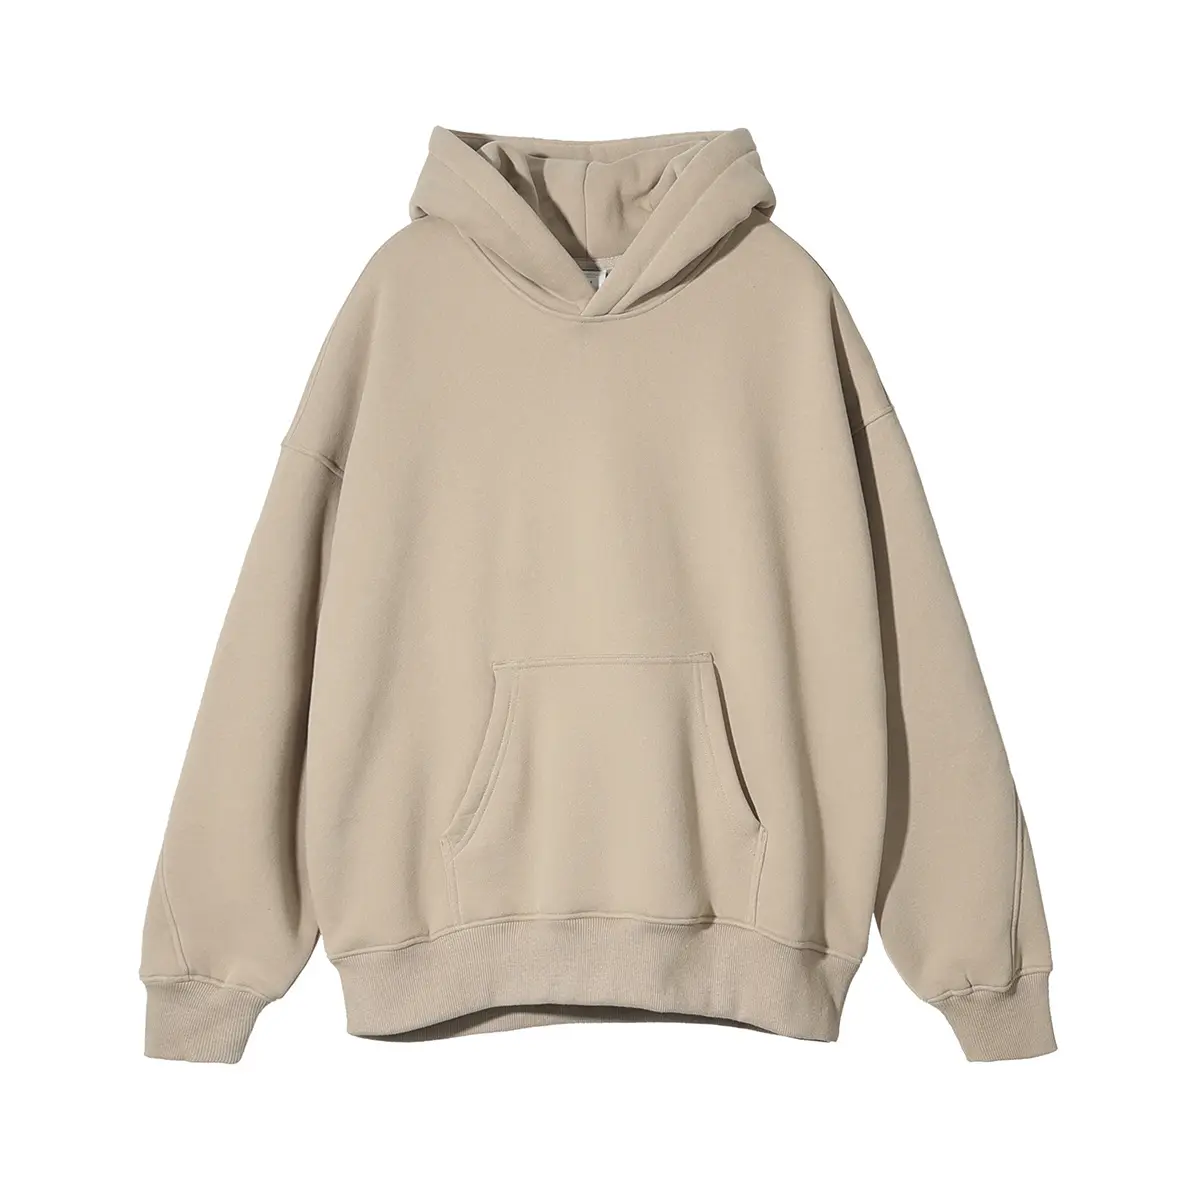 New arrival high quality cotton oversized blank fashion hoodie men and women winter hoodie sweater daily wear